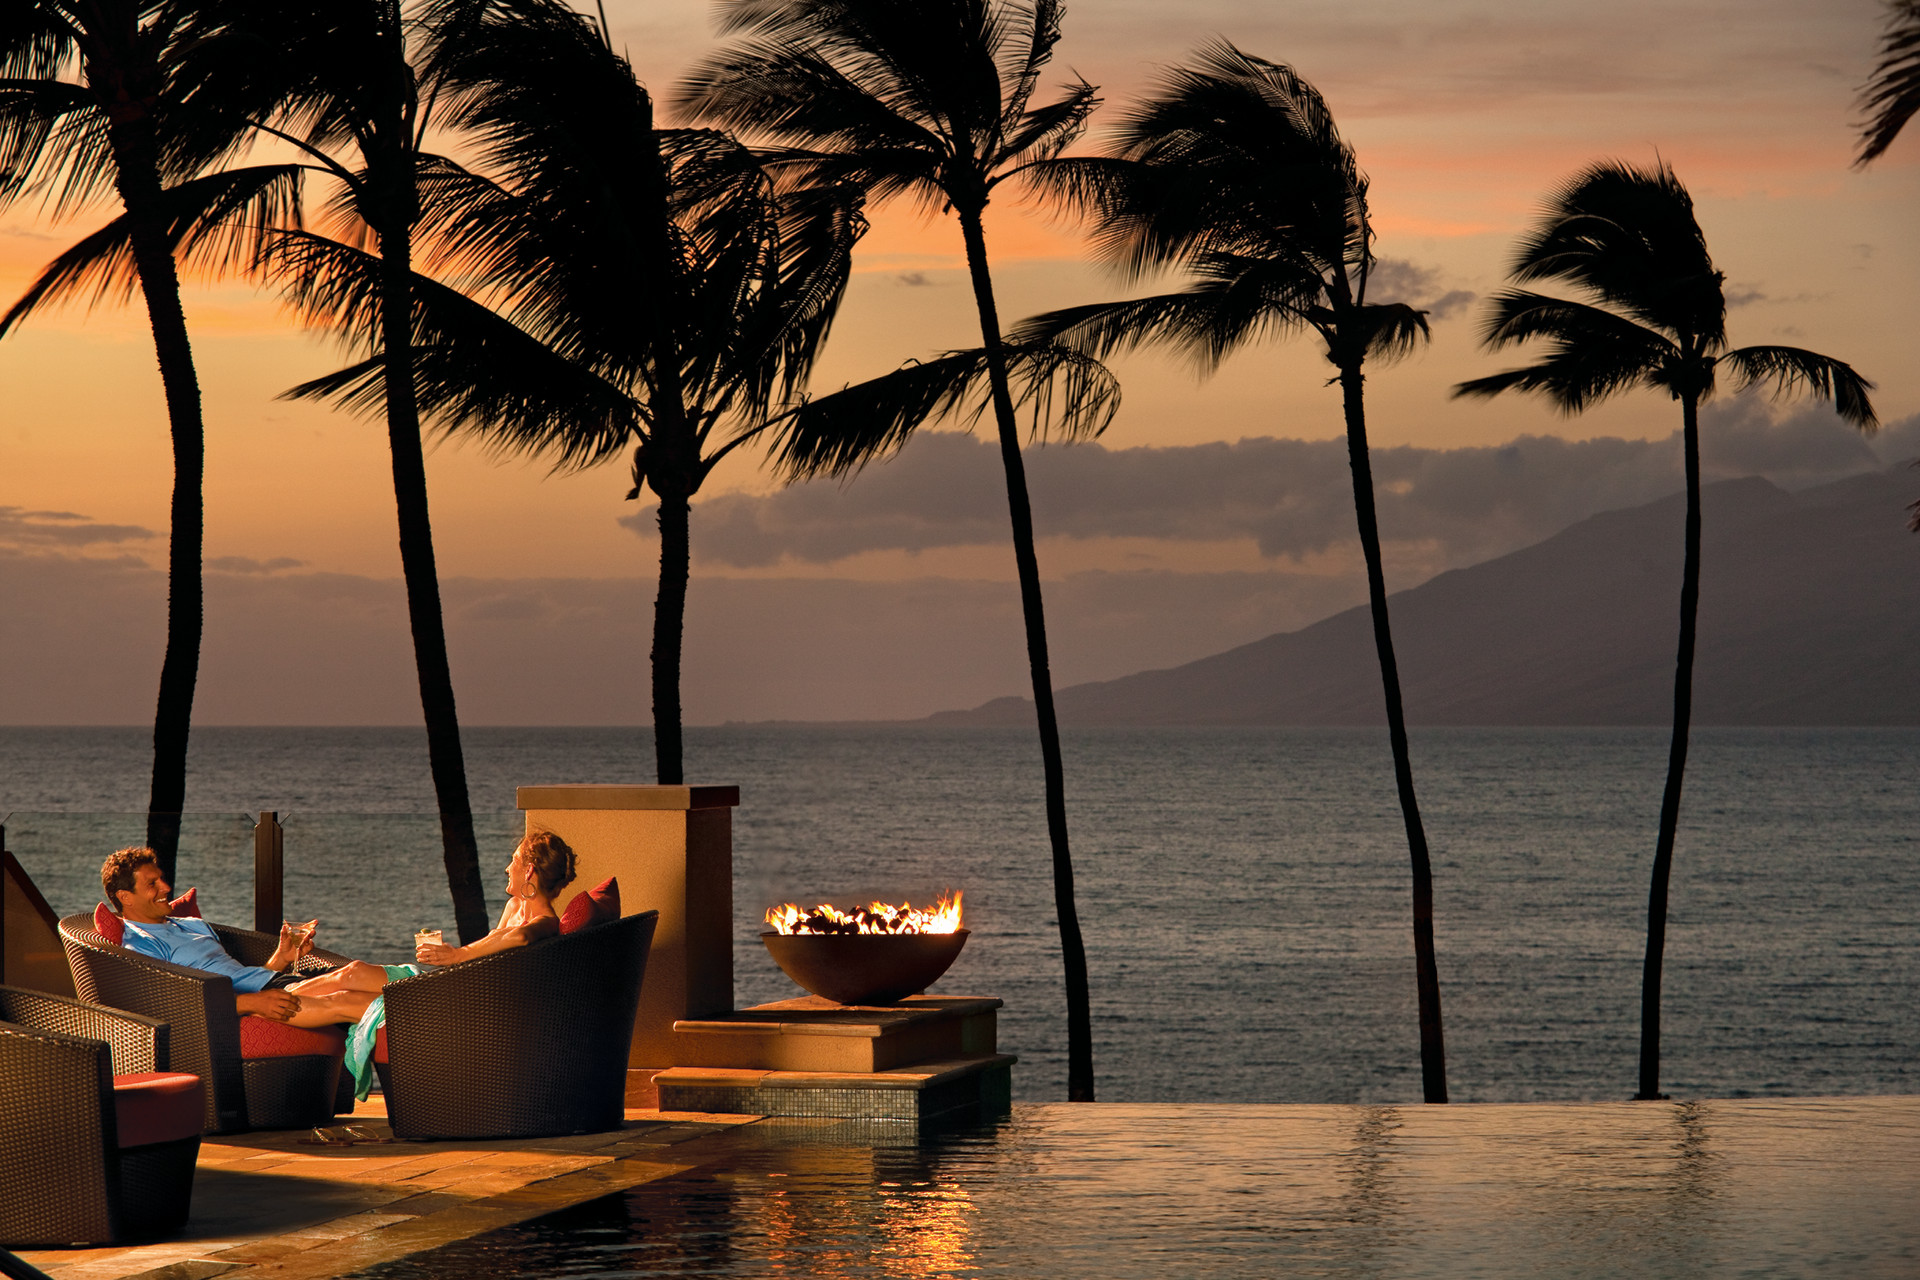 After an exhilarating day on location, relax poolside at Four Seasons Resort Maui's iconic  Serenity Pool.